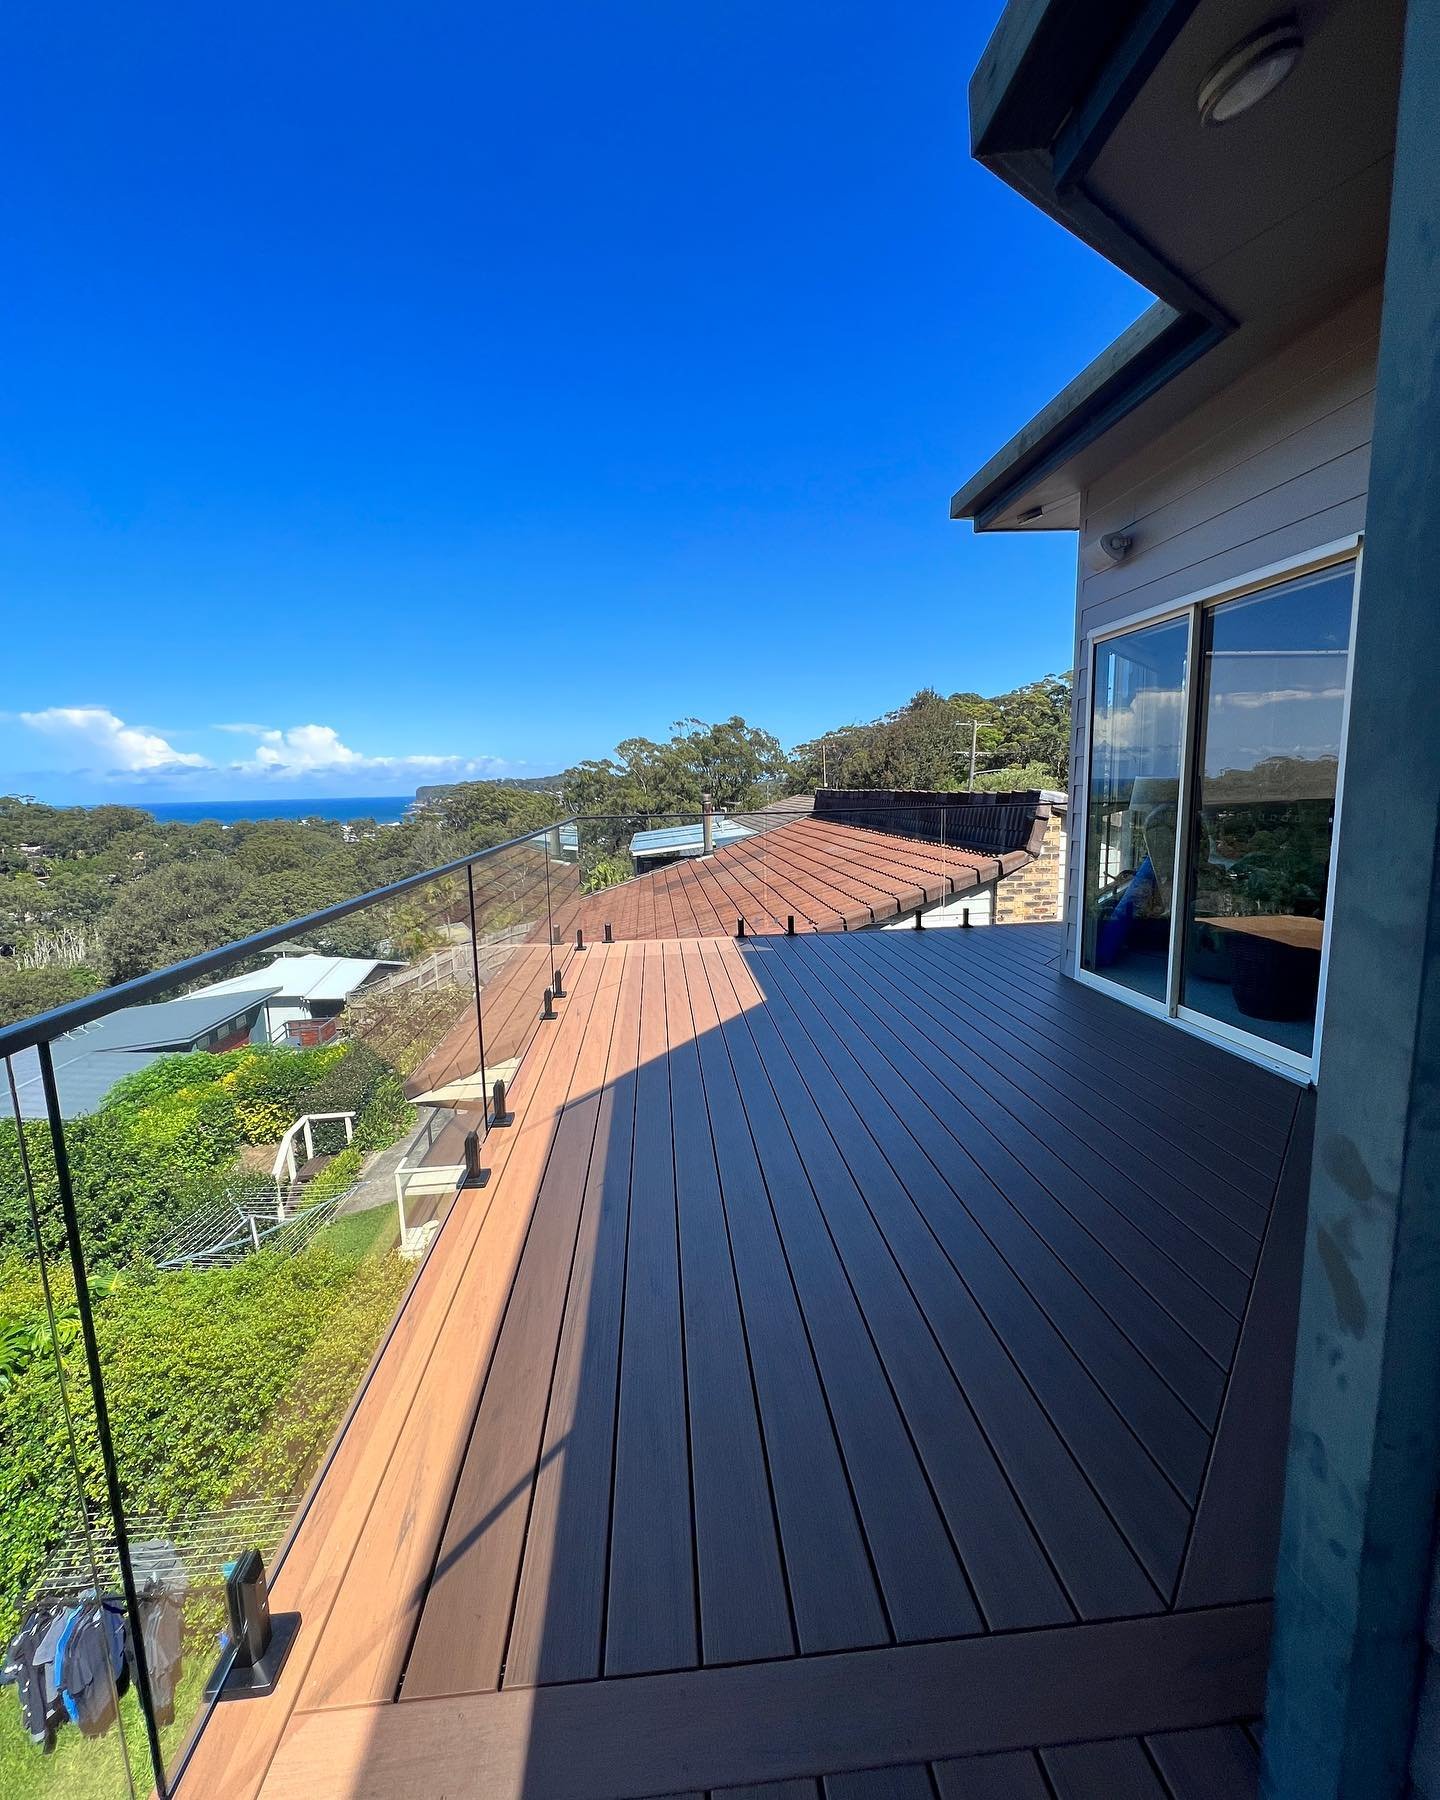 N O R T H  A V O C A

TREX LINEAGE BABY!
Absolutely loving this range of Trex composite decking &amp; it seems like all our clients are too!
Jasper has been a hit for us this year&hellip; dare we say it could be the new Island Mist.

Our North Avoca 